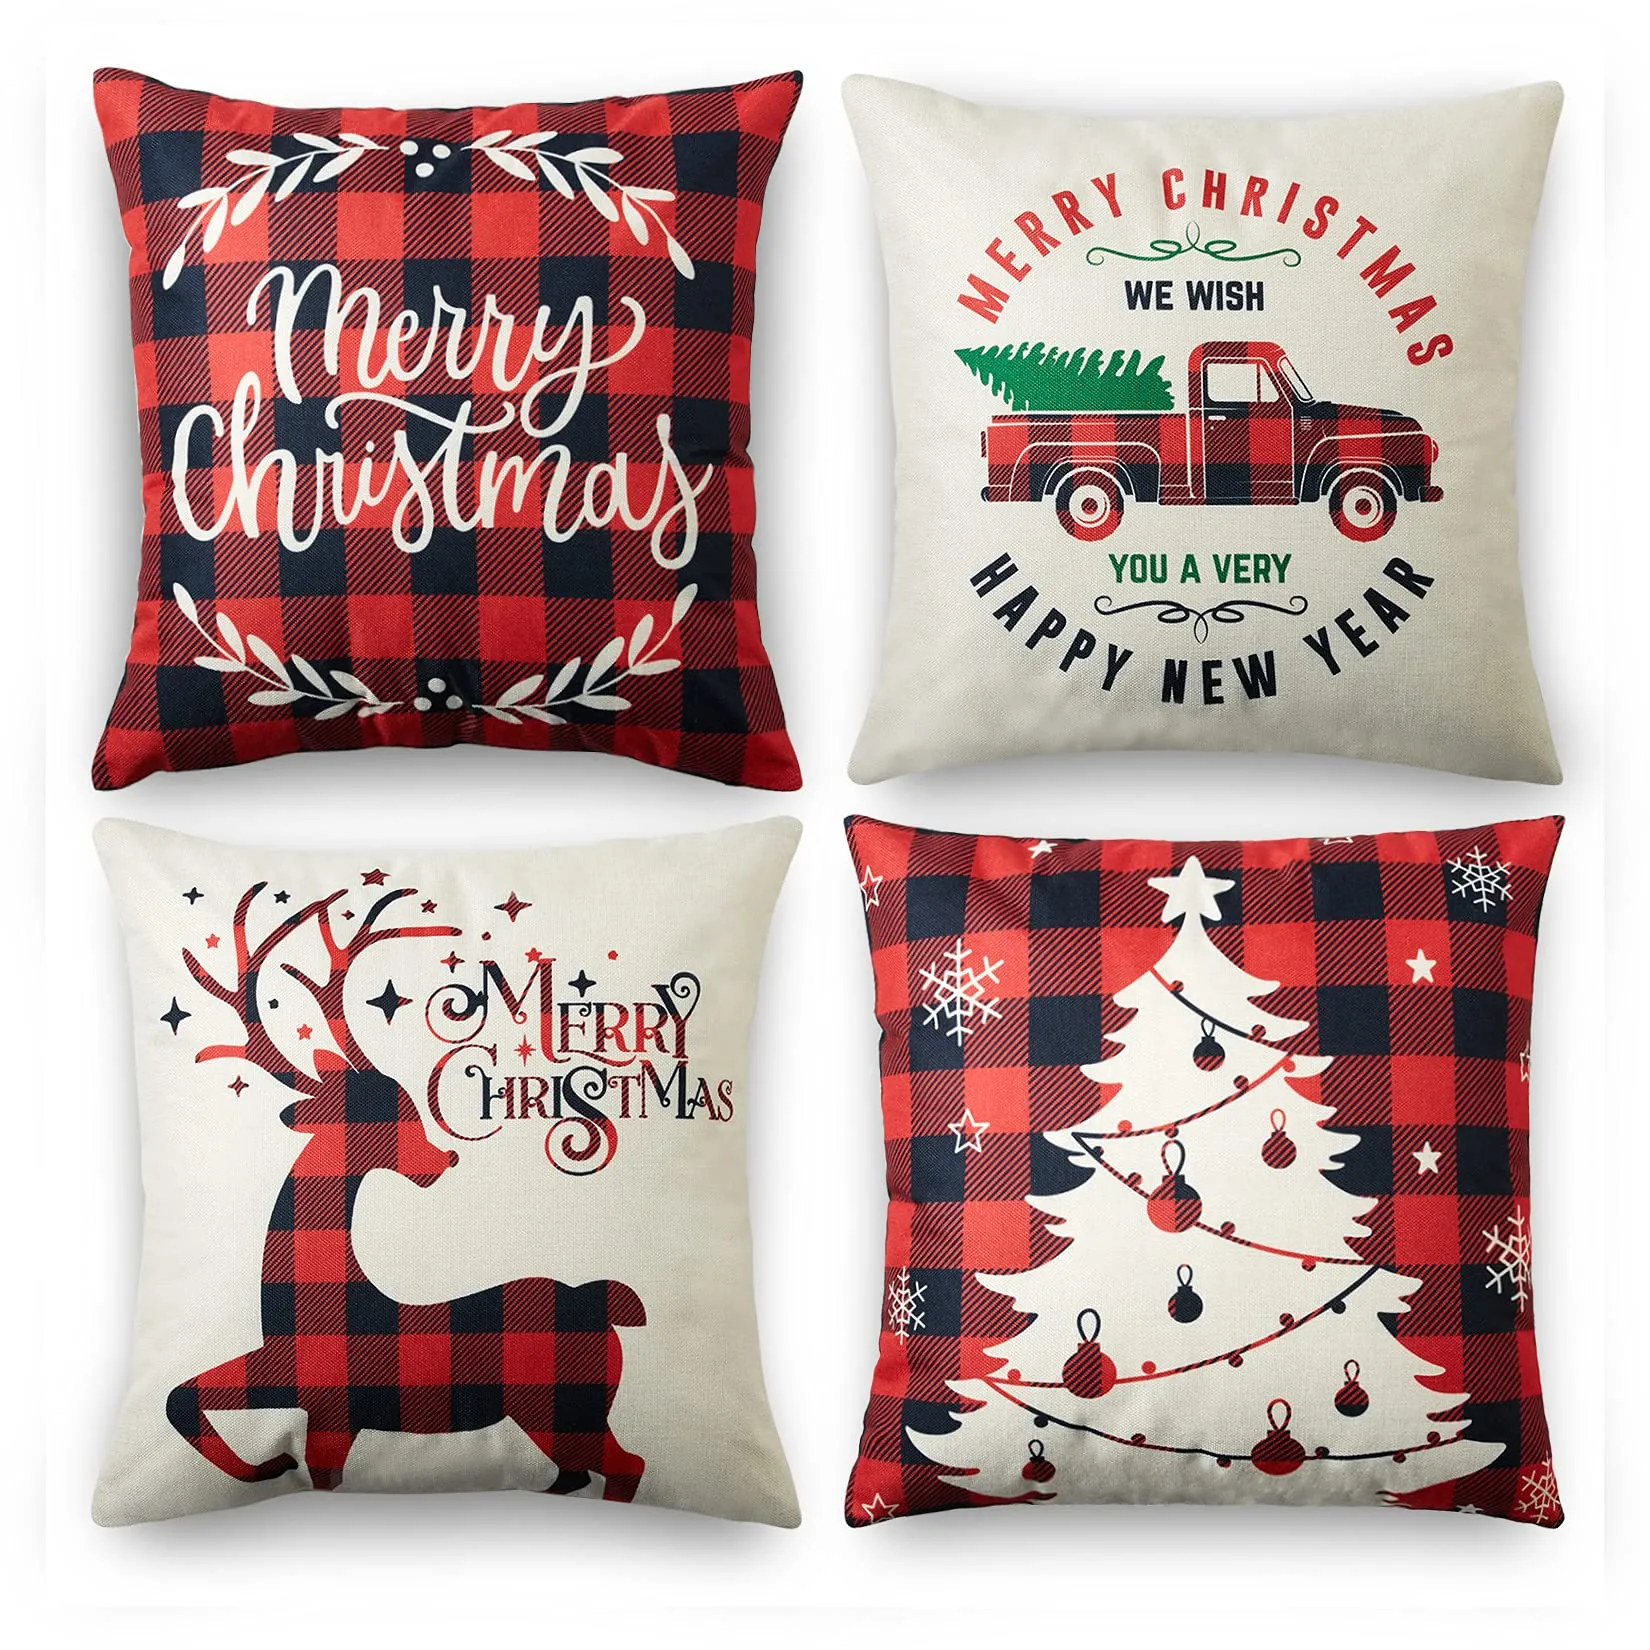 christmas pillow covers 20x20 inch set of 4 farmhouse pillow covers holiday rustic linen pillow case for sofa couch christmas decorations throw pillow covers